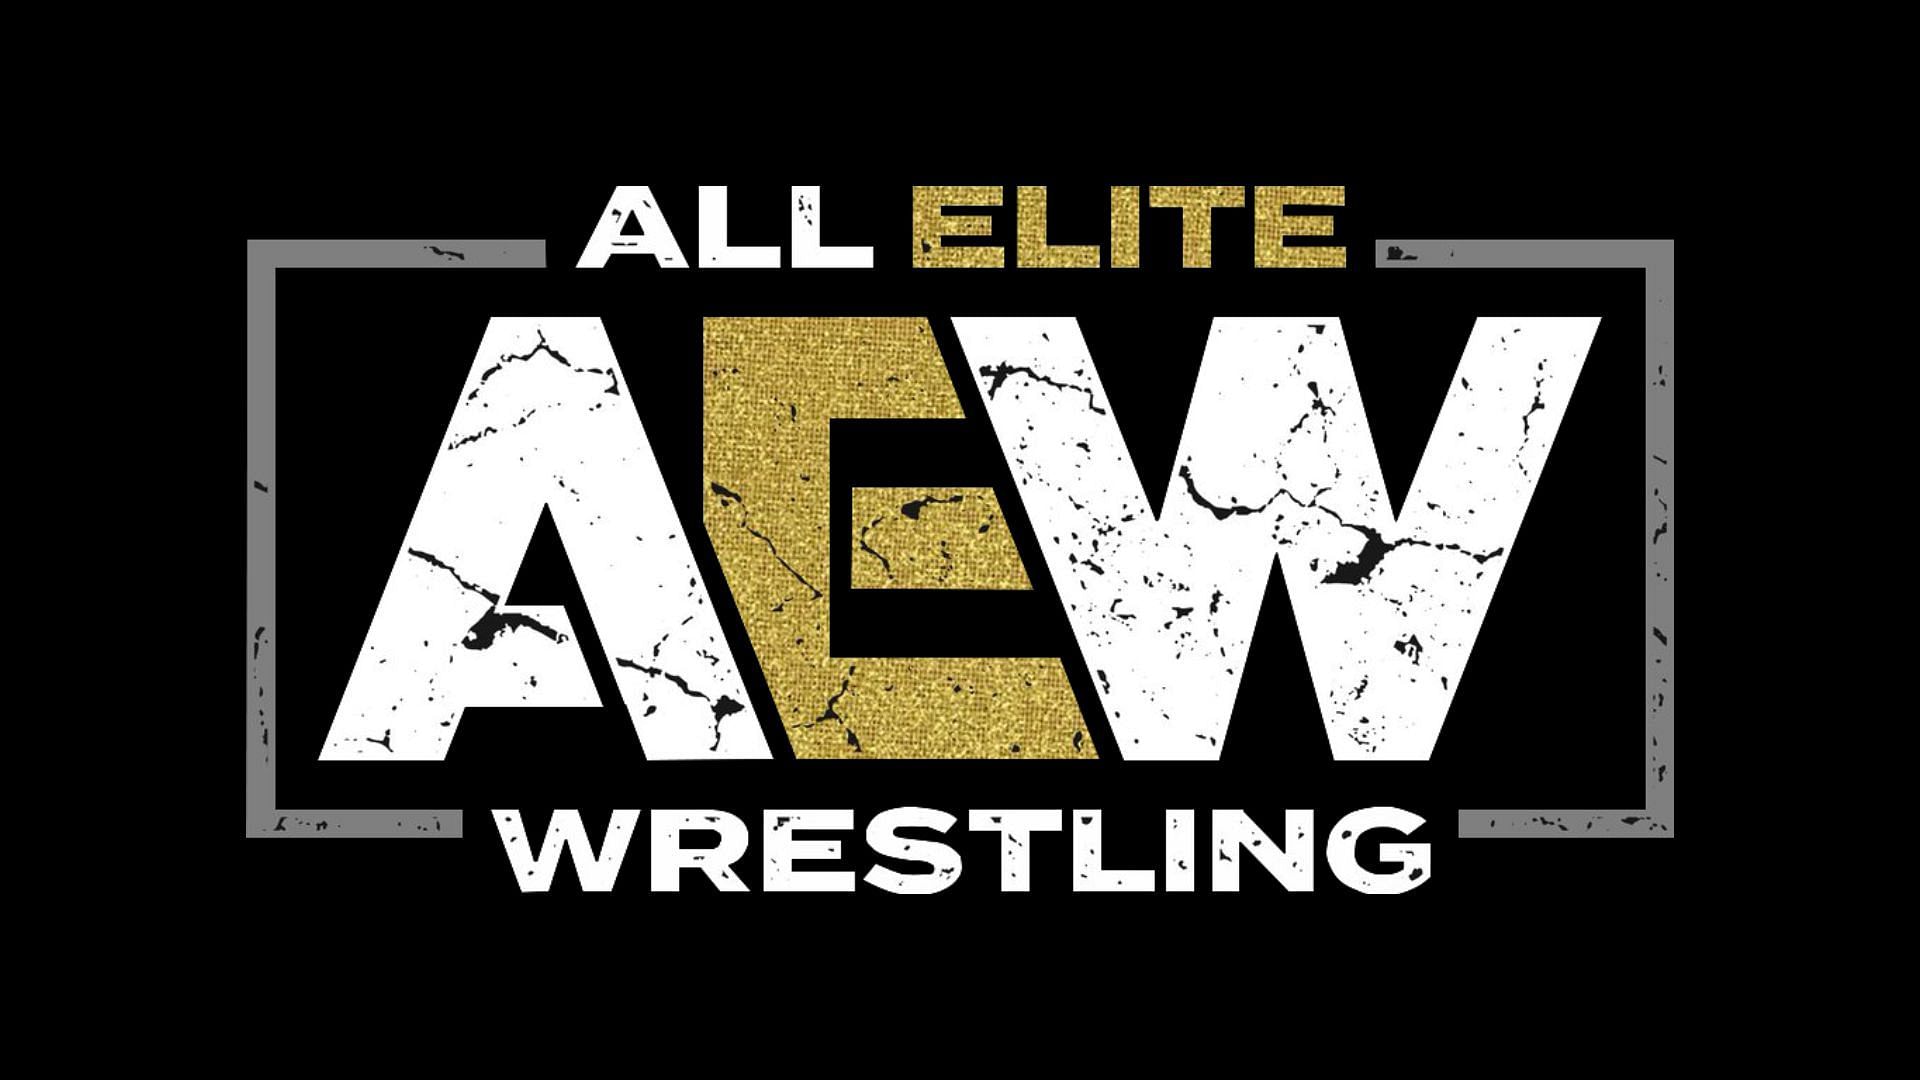 Will this AEW star continue to make his father proud across his career?